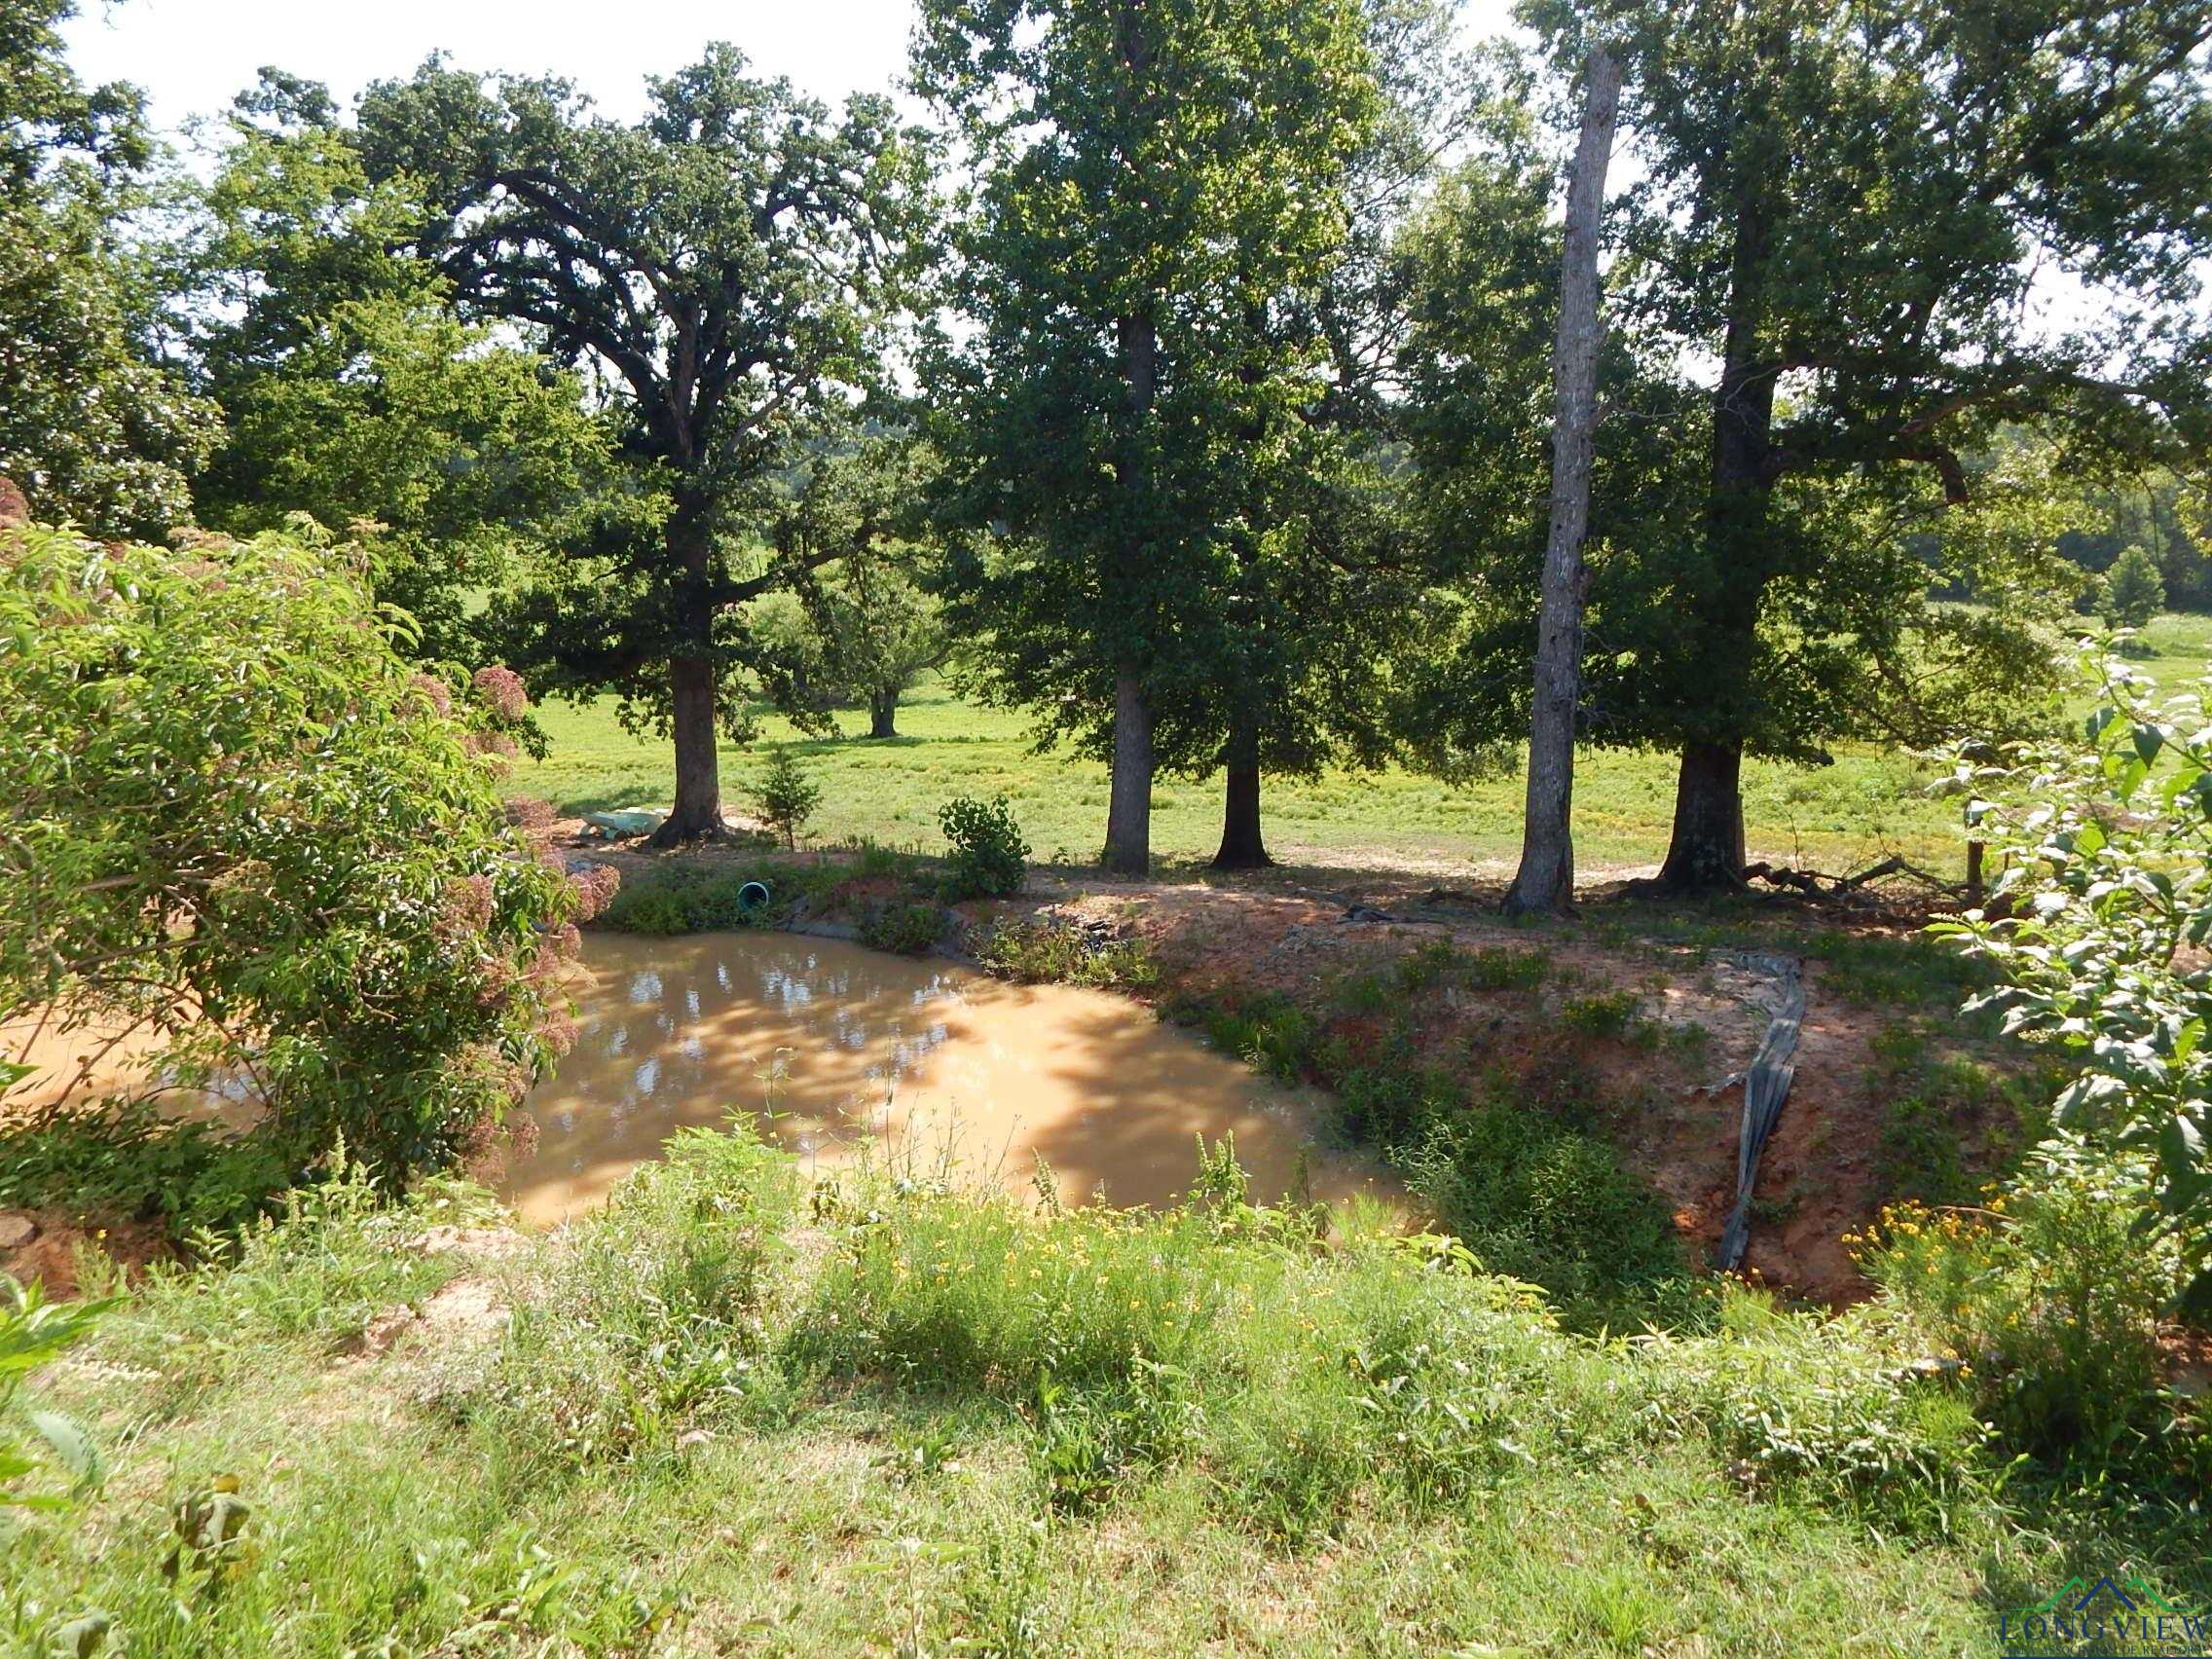 8223 S ST HWY 155, Big Sandy, Texas, 75755, United States, ,Land,For Sale,8223 S ST HWY 155,1487670